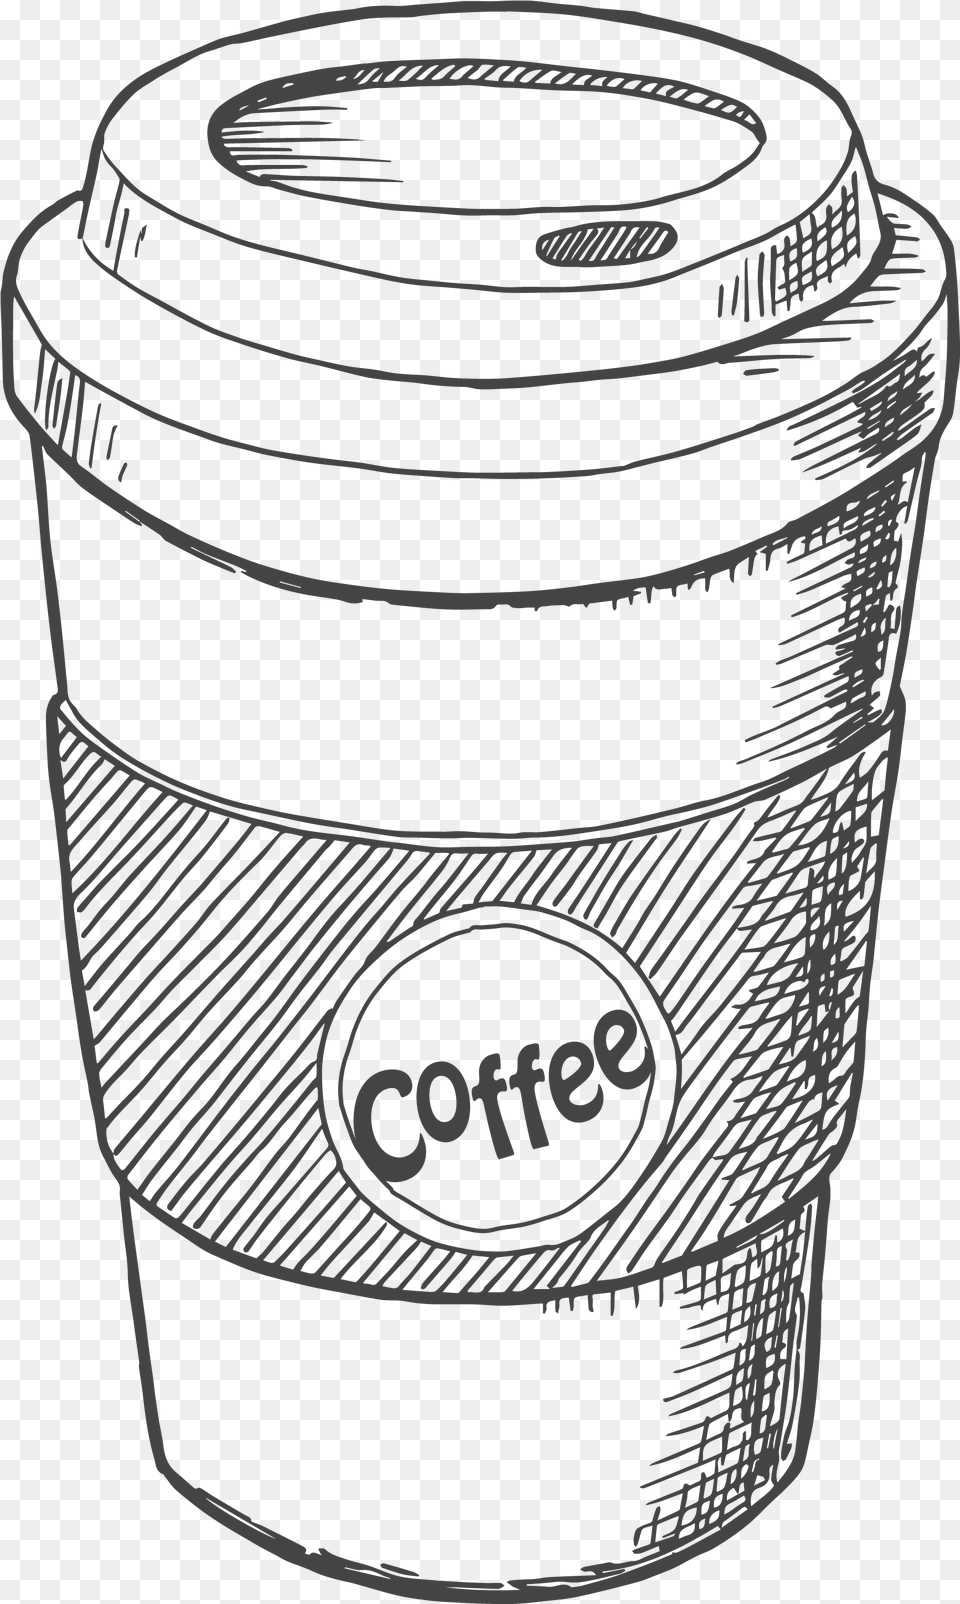 Our Coffee Sketch, Bottle, Shaker, Cup, Beverage Free Png Download